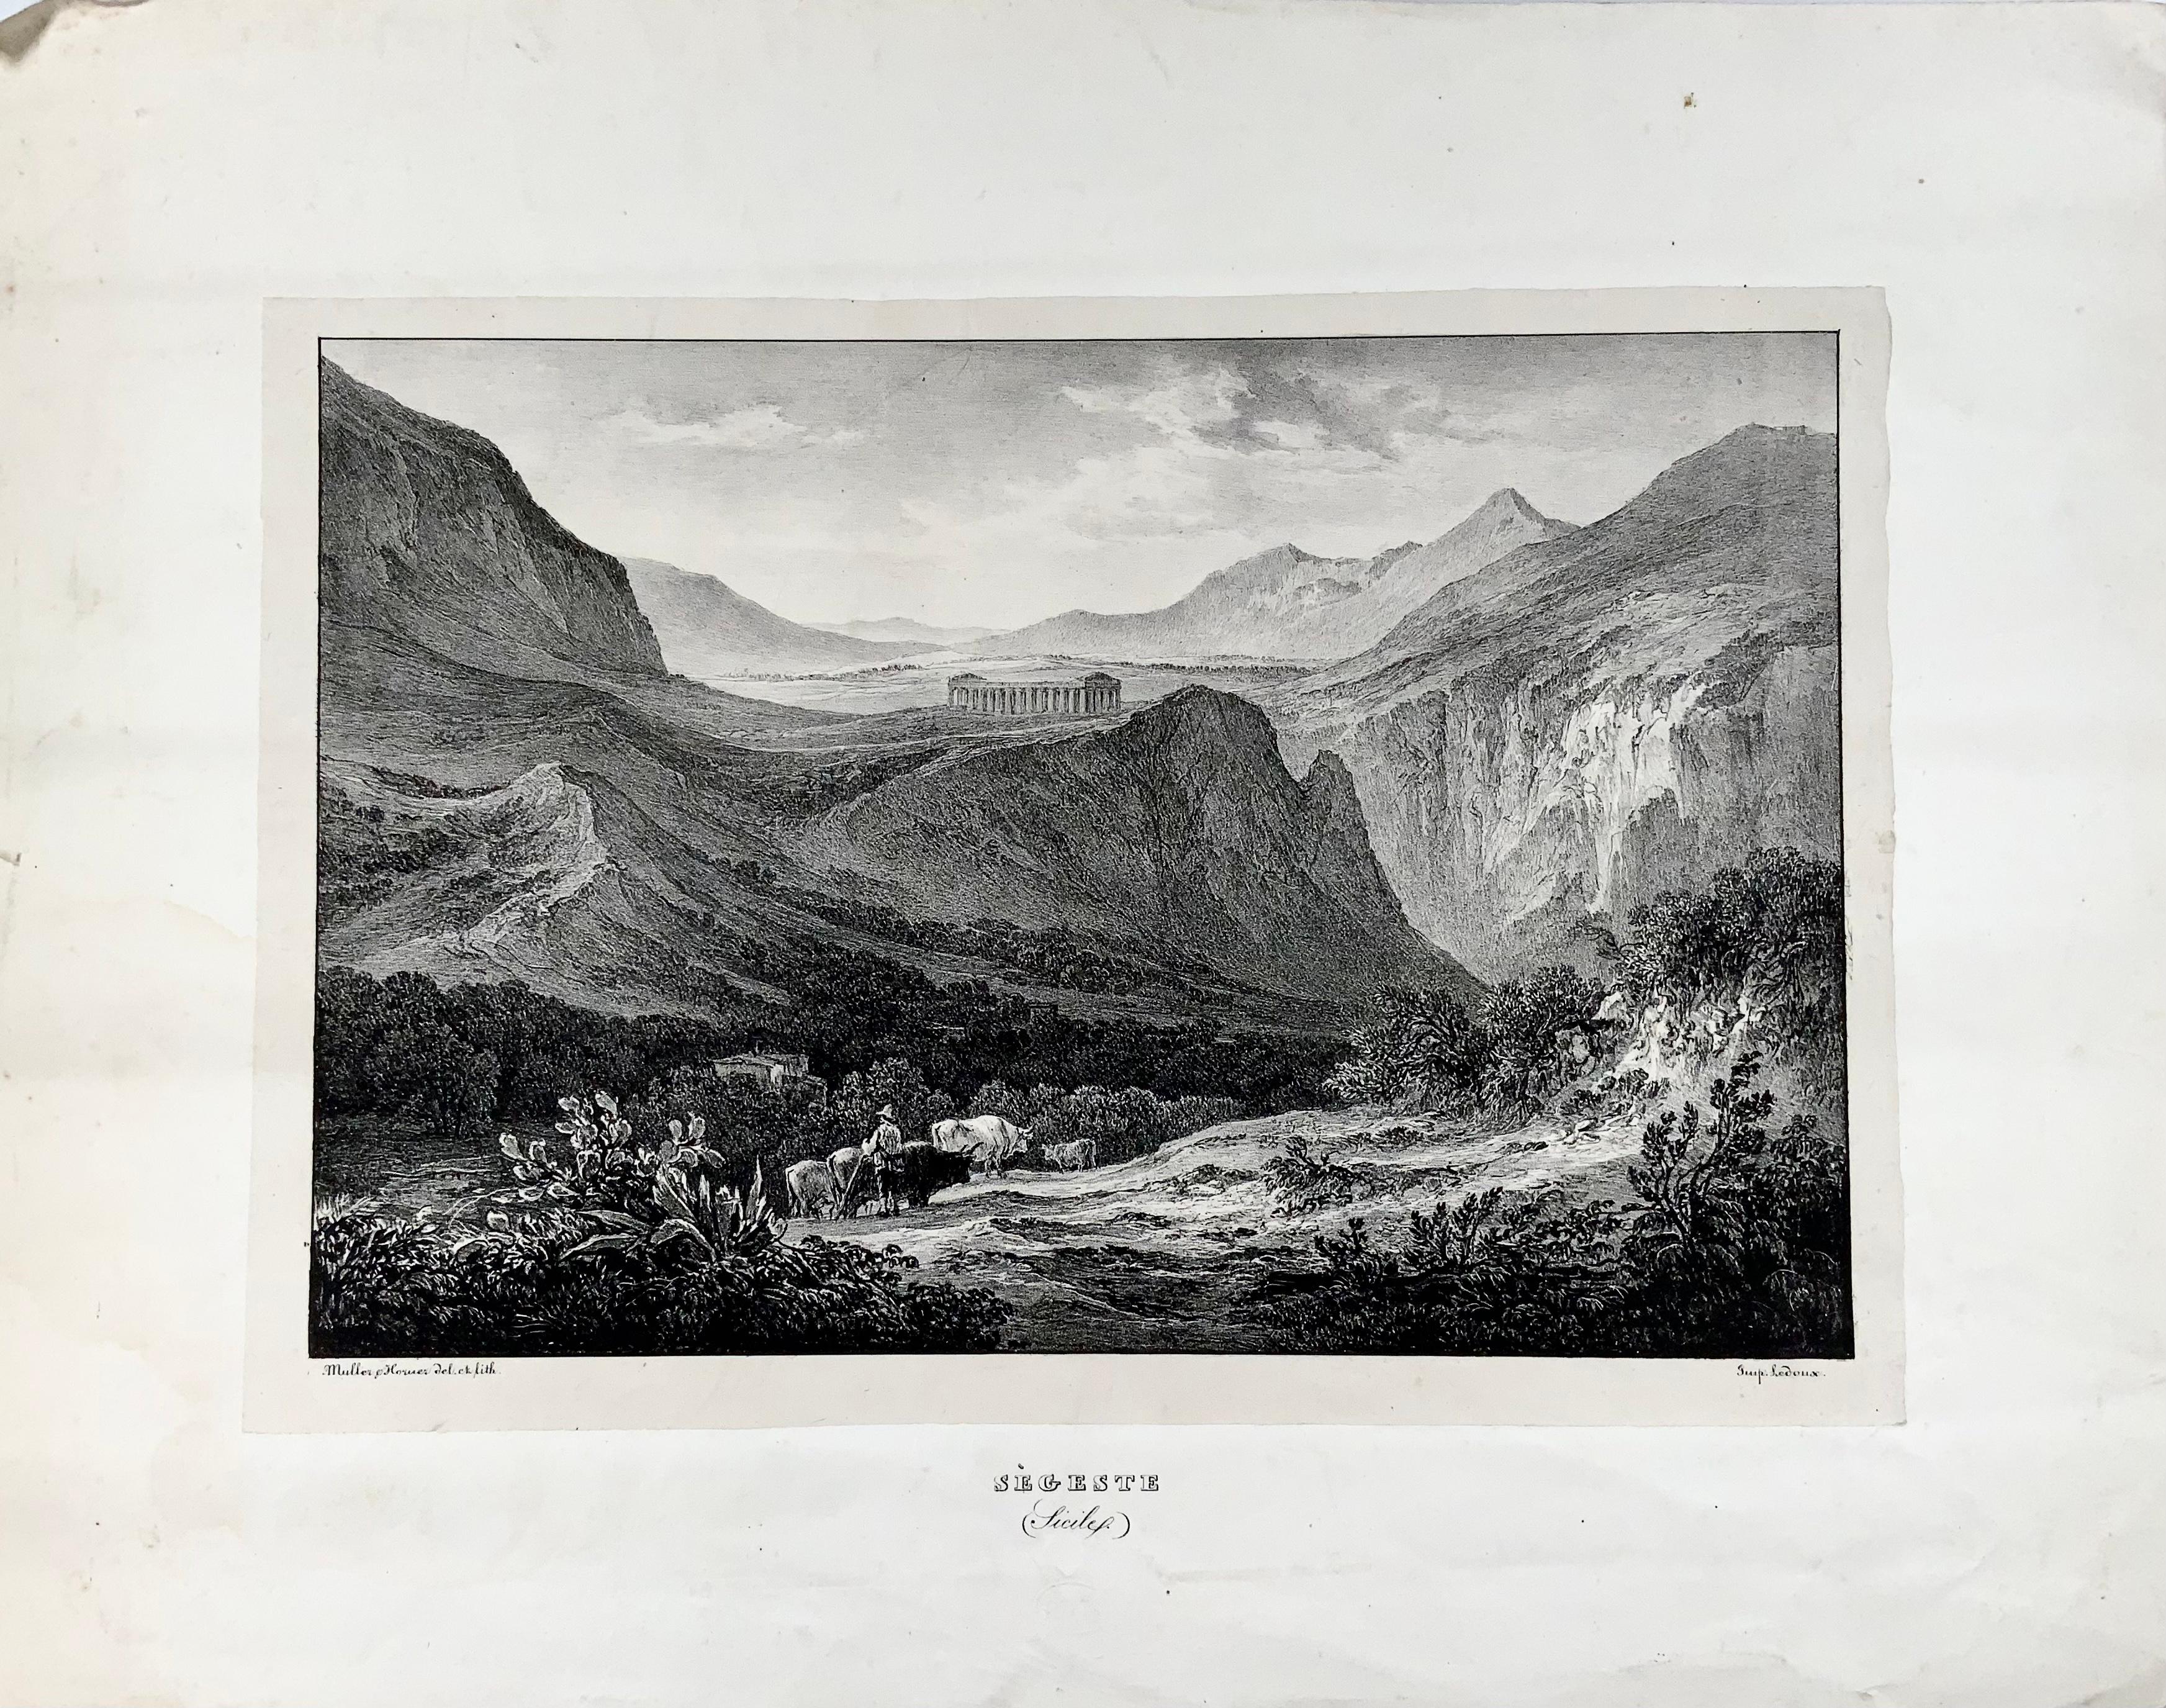 Horner [Friedrich] and Müller [Rudolf]

Temple of Segesta, Sicily

[Naples Royale Lith. Militaire, 1833.]

Printed on china paper. Overall size: 31.5 x 42 cm

Small blindstamp 